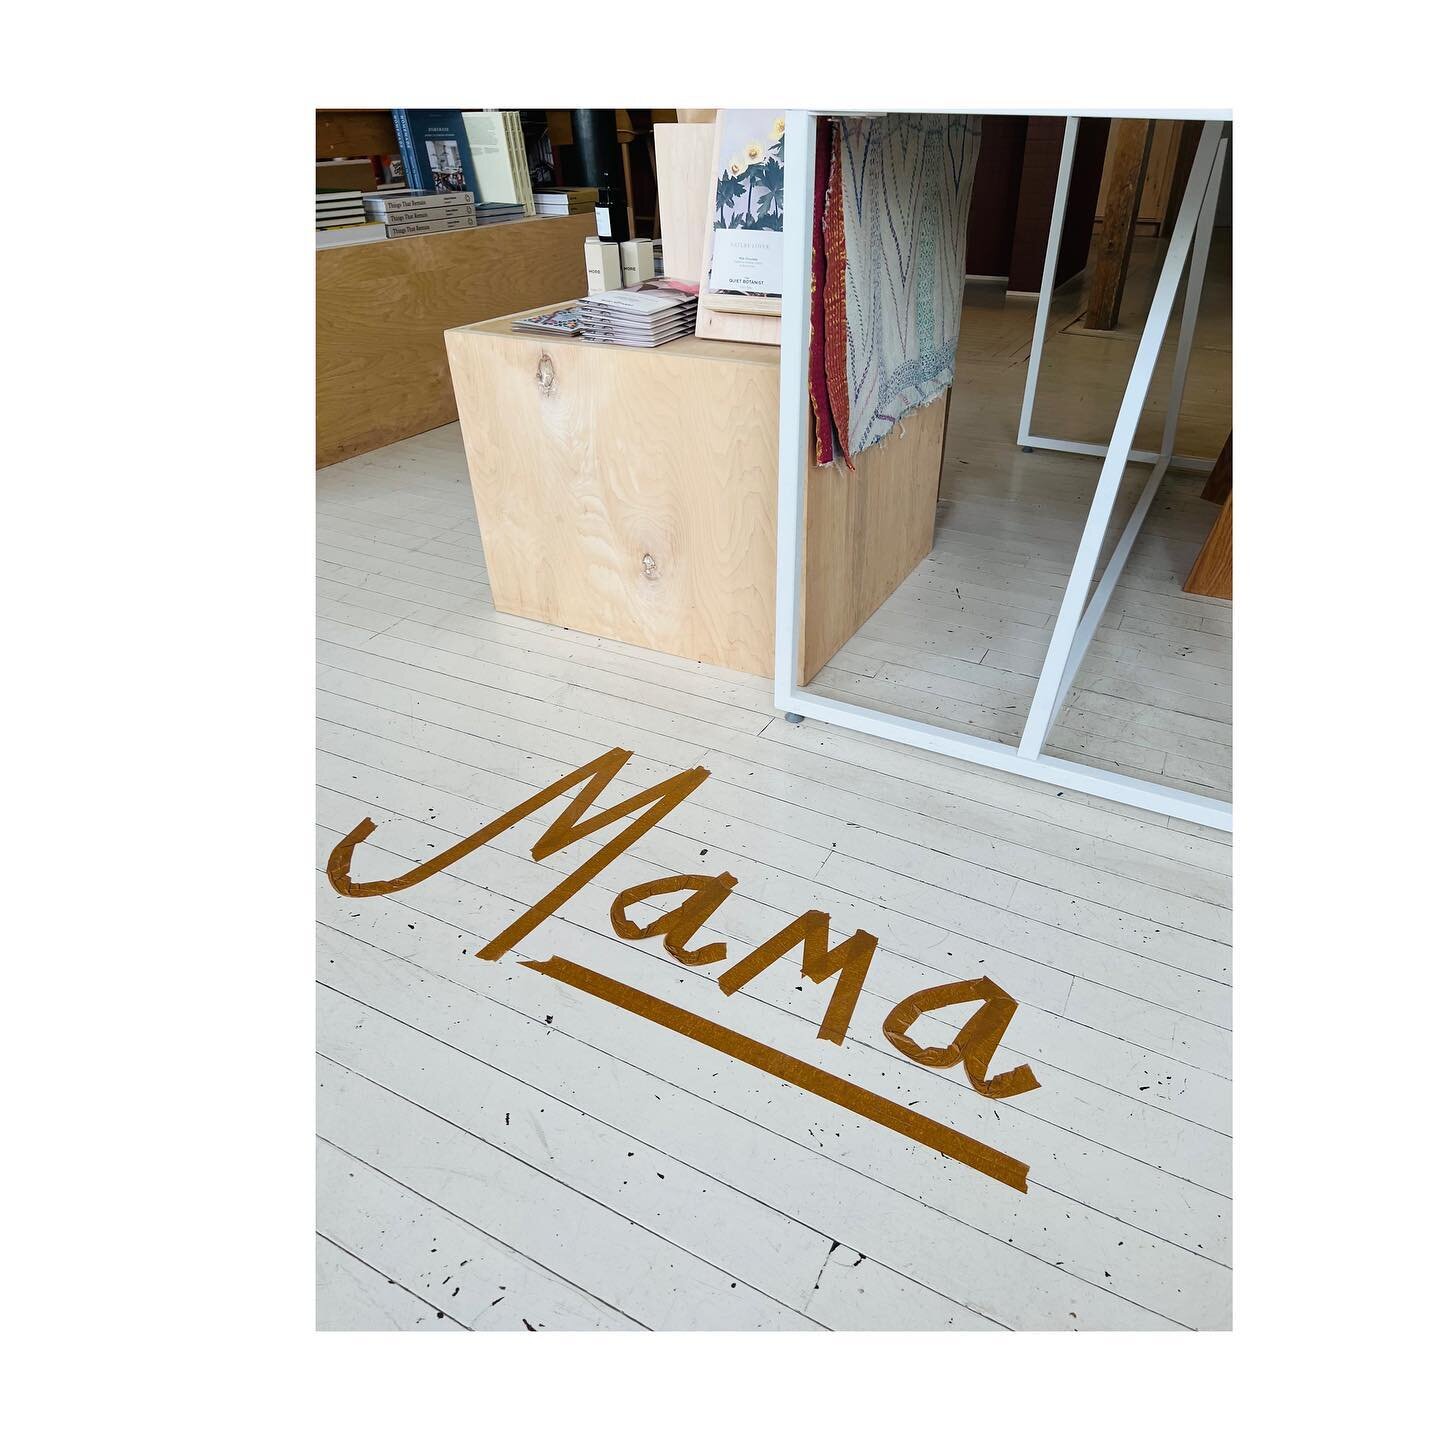 MAMA &mdash;&mdash; we love ours !  Robert + Gert are at it all day putting together your MAMA parcels !
.
.
.
#mama #mothersday #local #upstatelife #hudsonvalley #ny #kinderhookknittingmill #kinderhook #ok #okp #okpantry #family